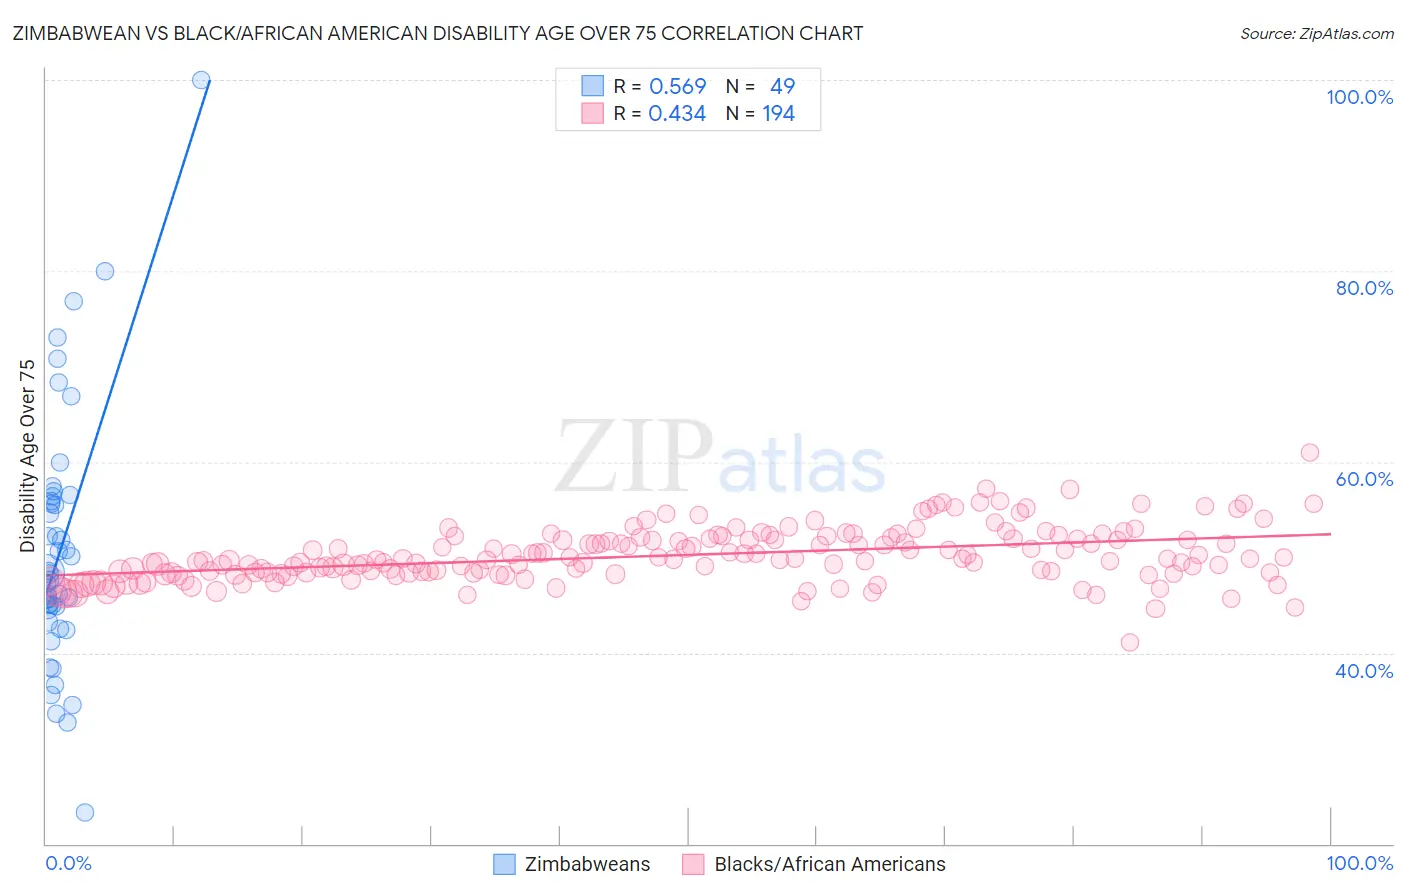 Zimbabwean vs Black/African American Disability Age Over 75